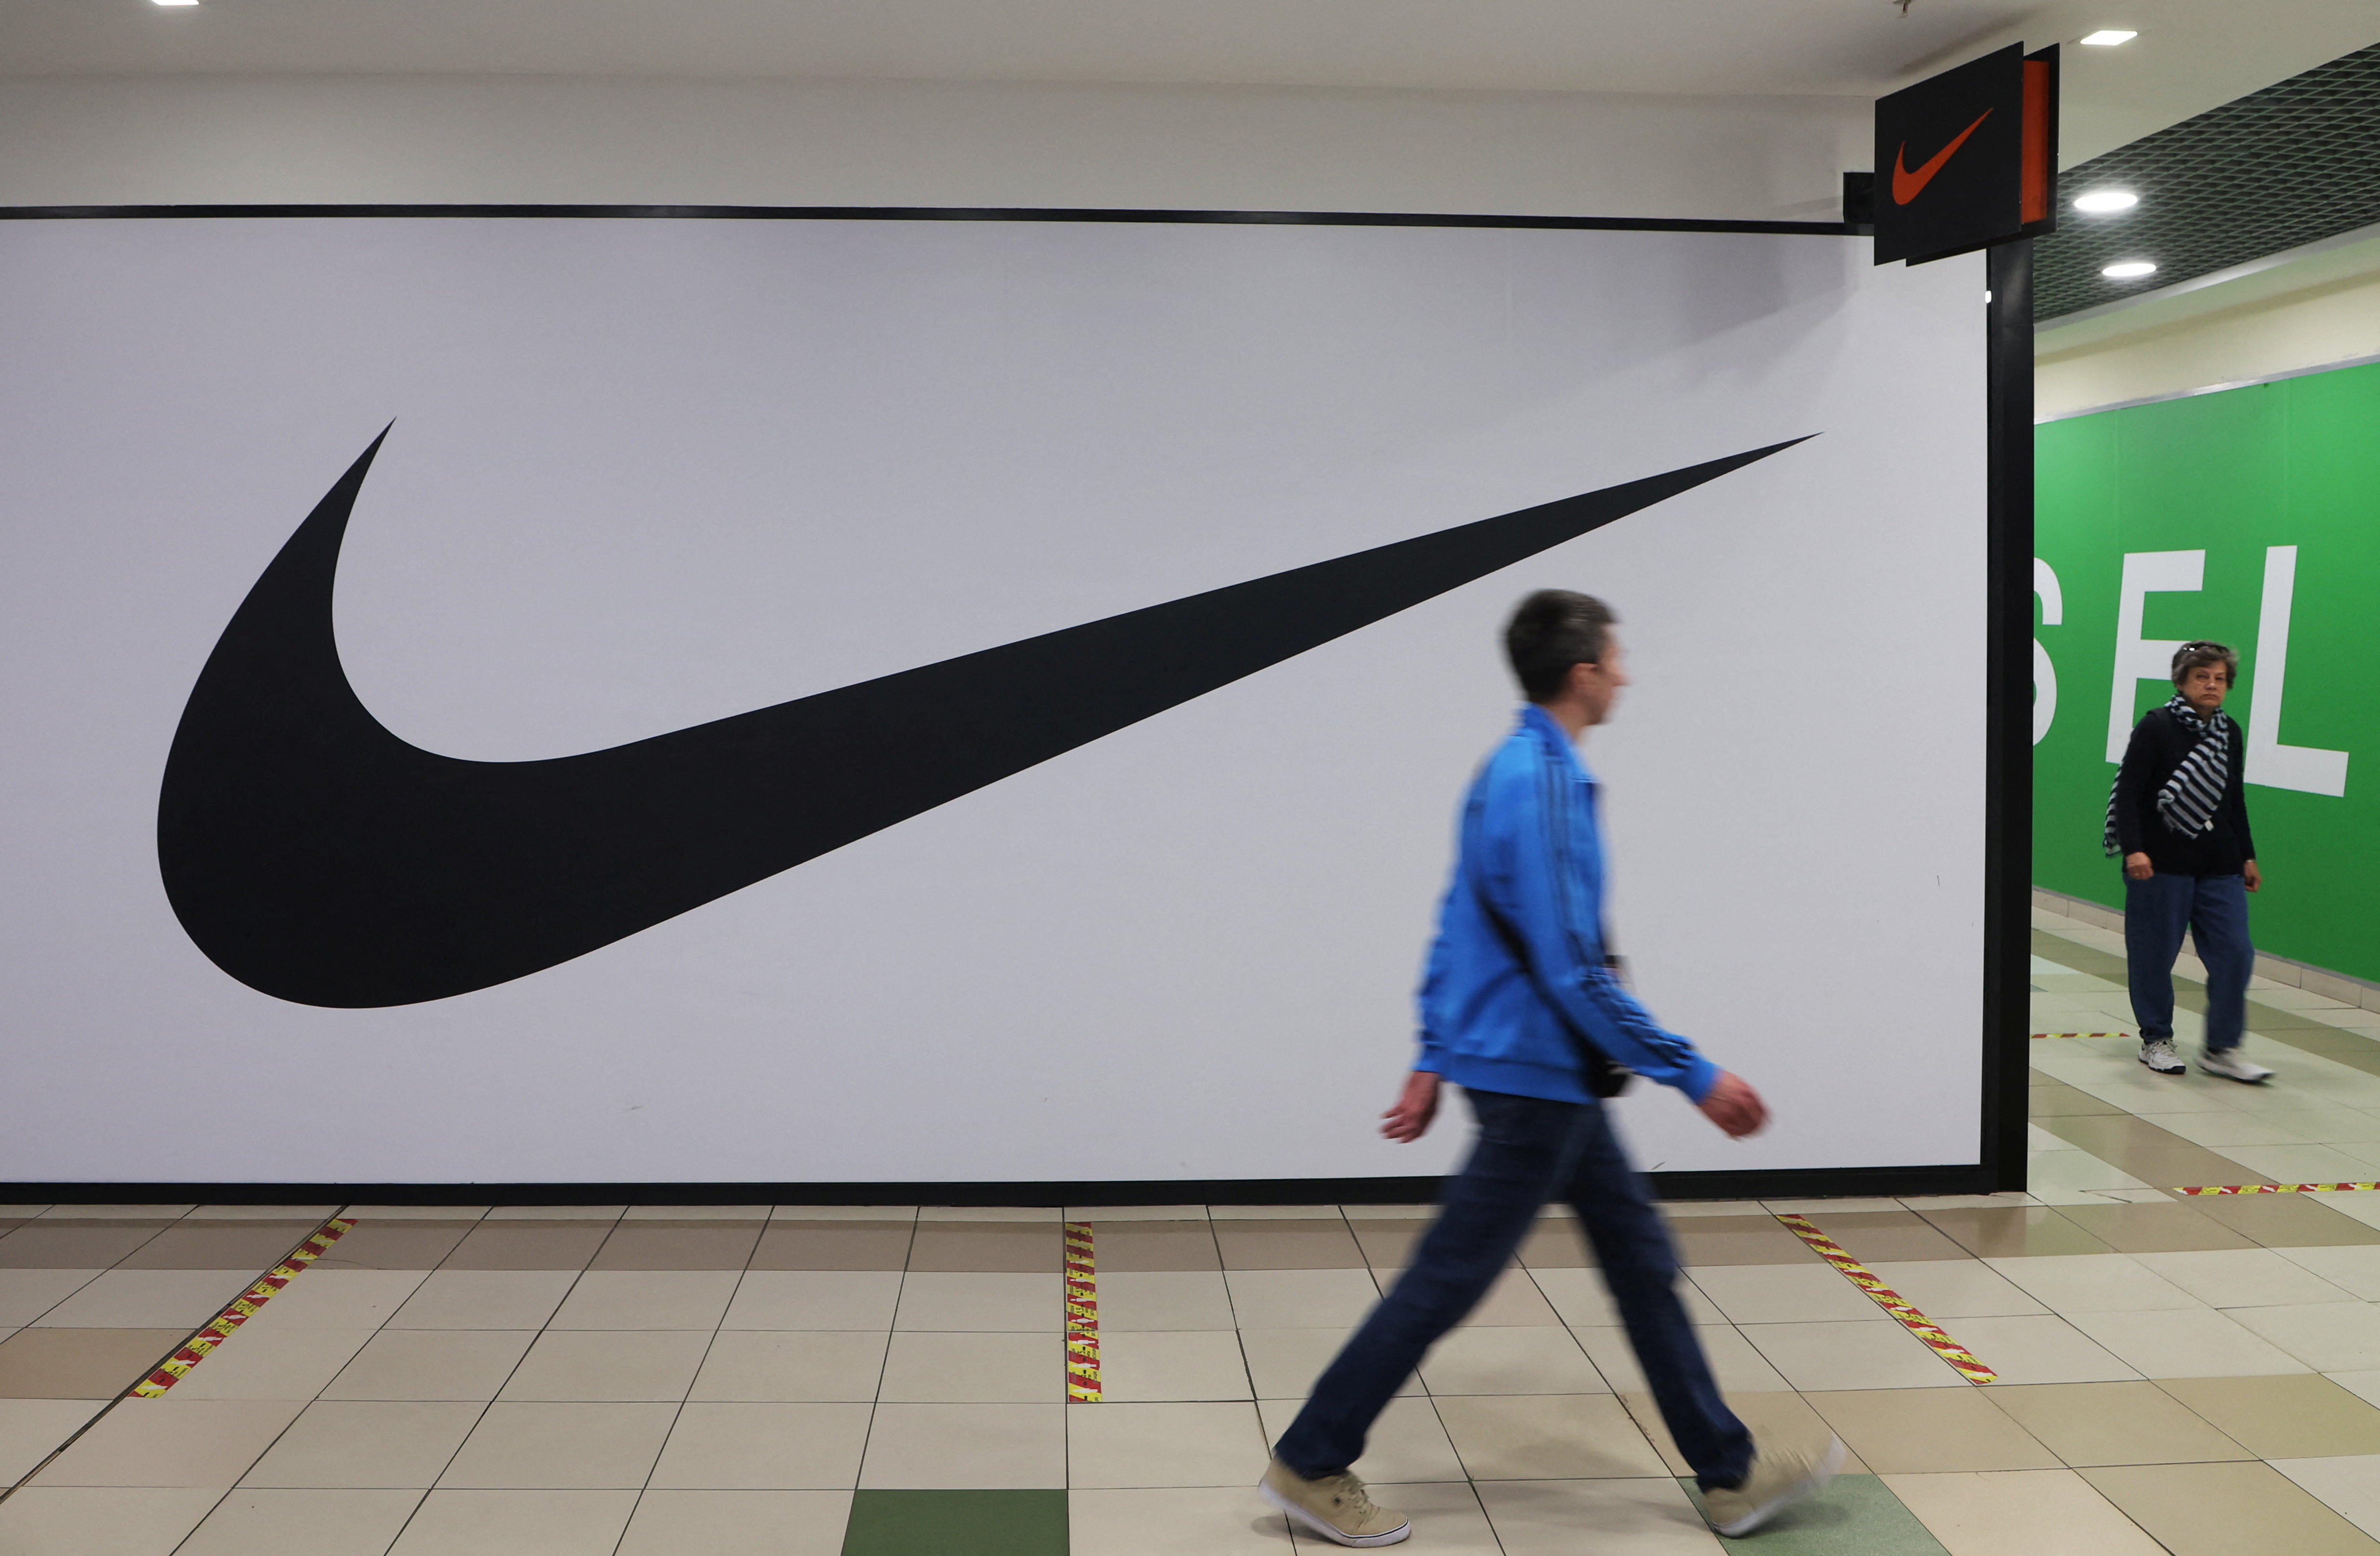 litro réplica Altitud EXCLUSIVE Nike to make full exit from Russia | Reuters